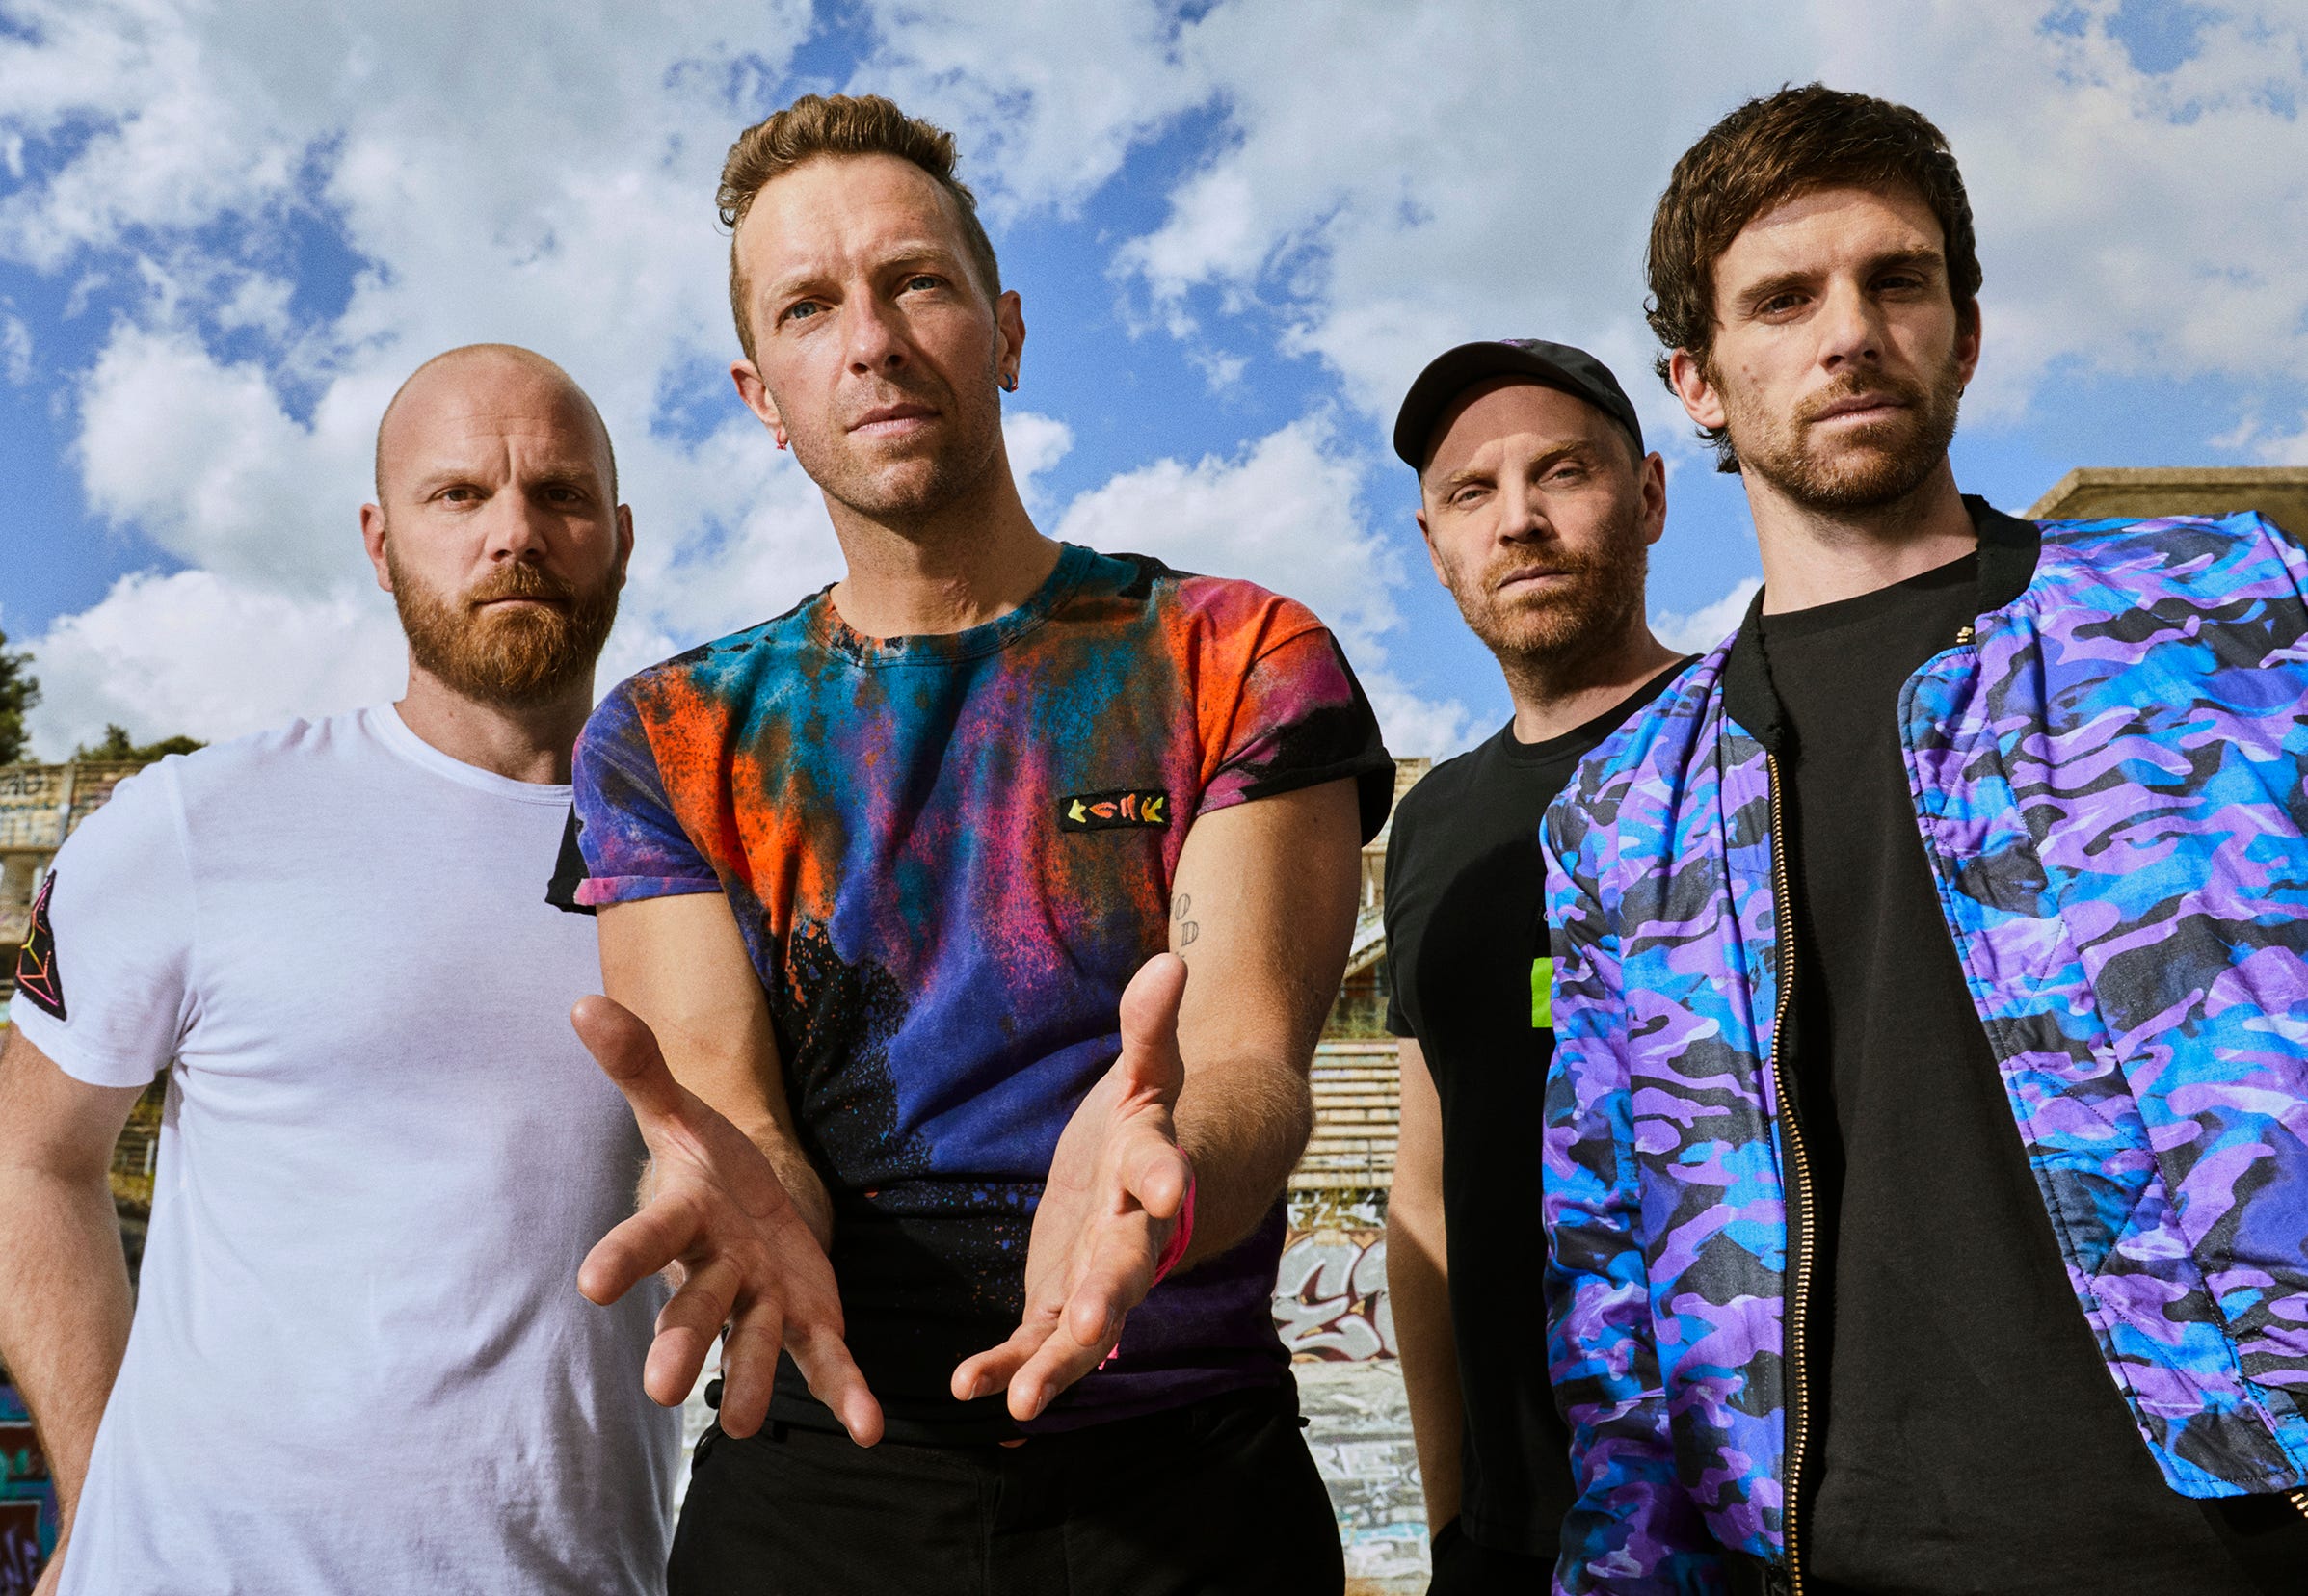 Coldplay S Chris Martin Talks Music Of The Spheres Album Bts Collab